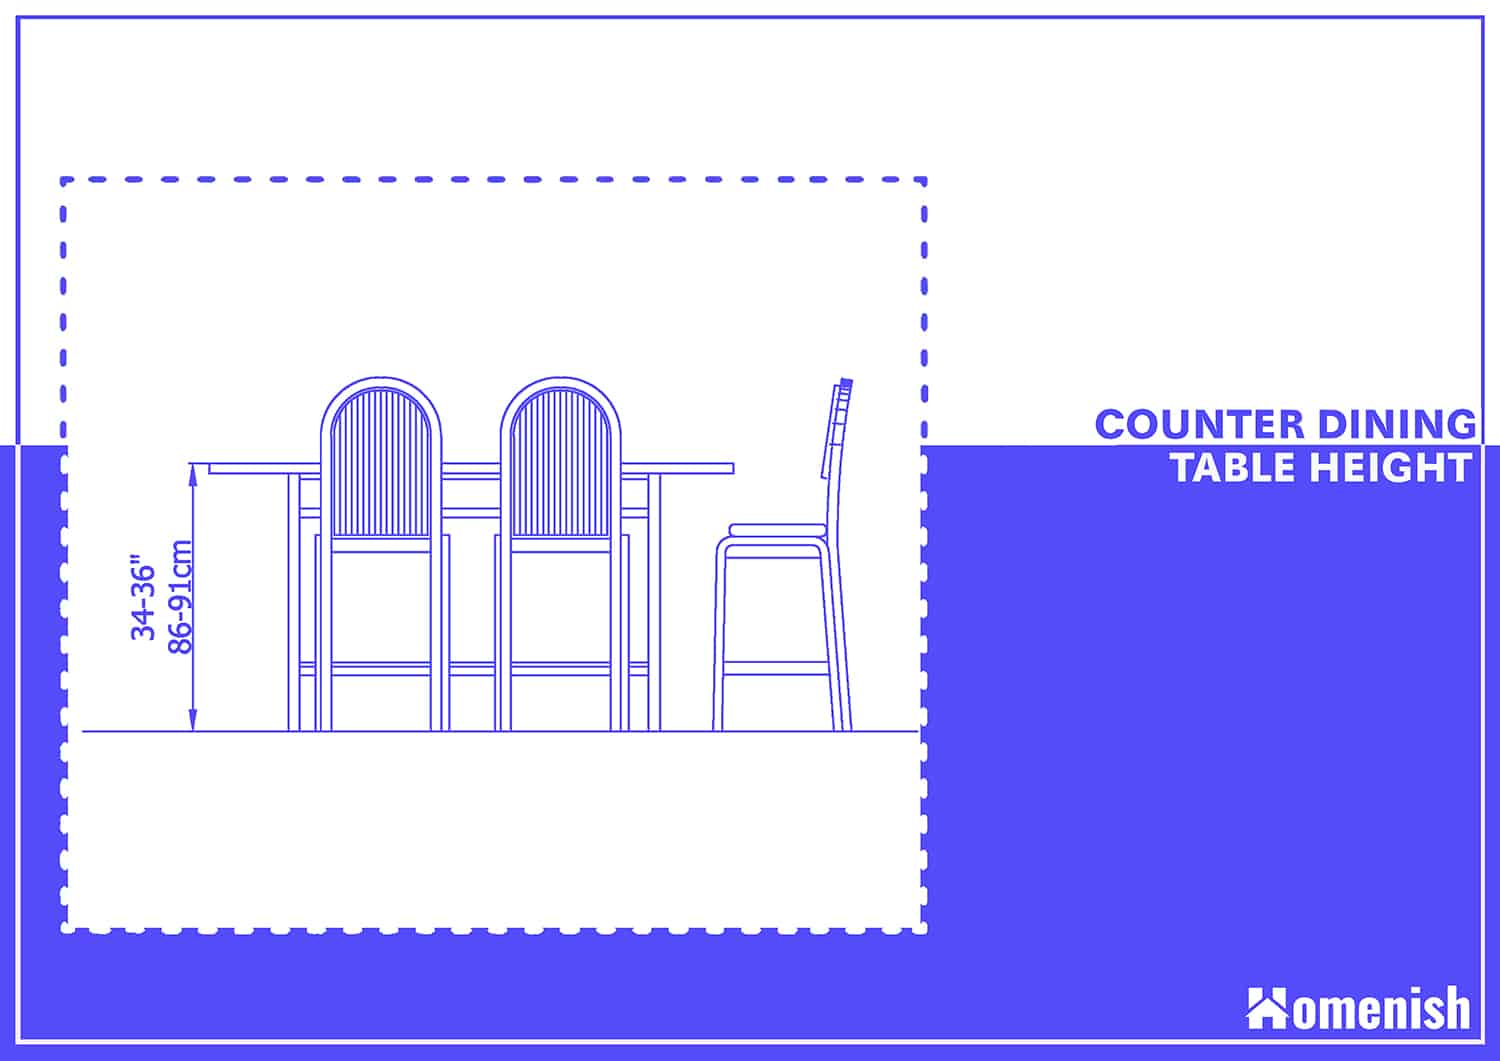 Counter Dining Table Height